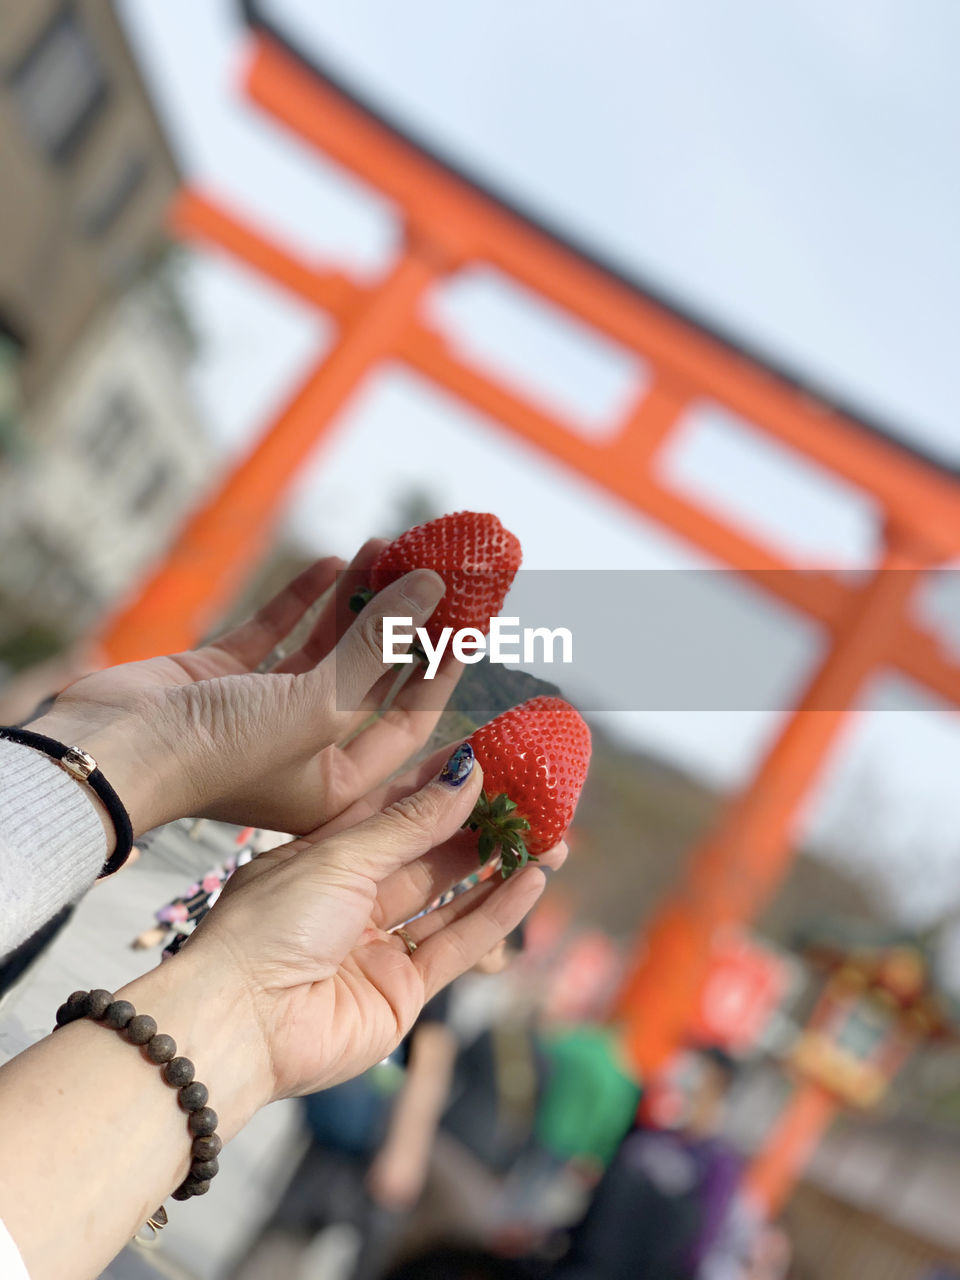 Hands holding delicious strawberries bought from the supermarket opposite the fushimi inari taisha 